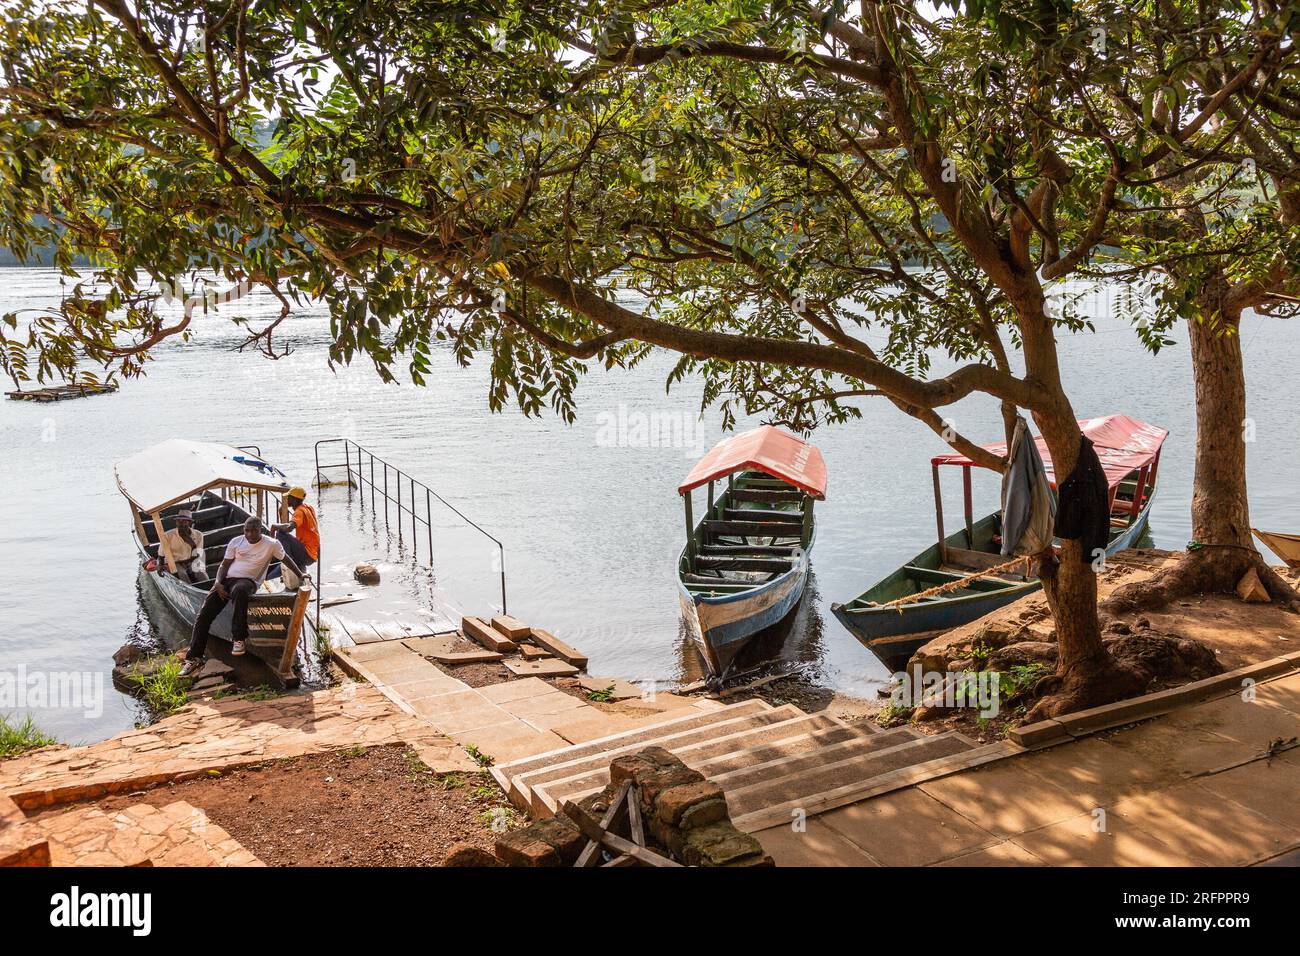 Three riverboats moored at embankment await tourists for an excursion on the Nile River in Jinja, Uganda. Stock Photo